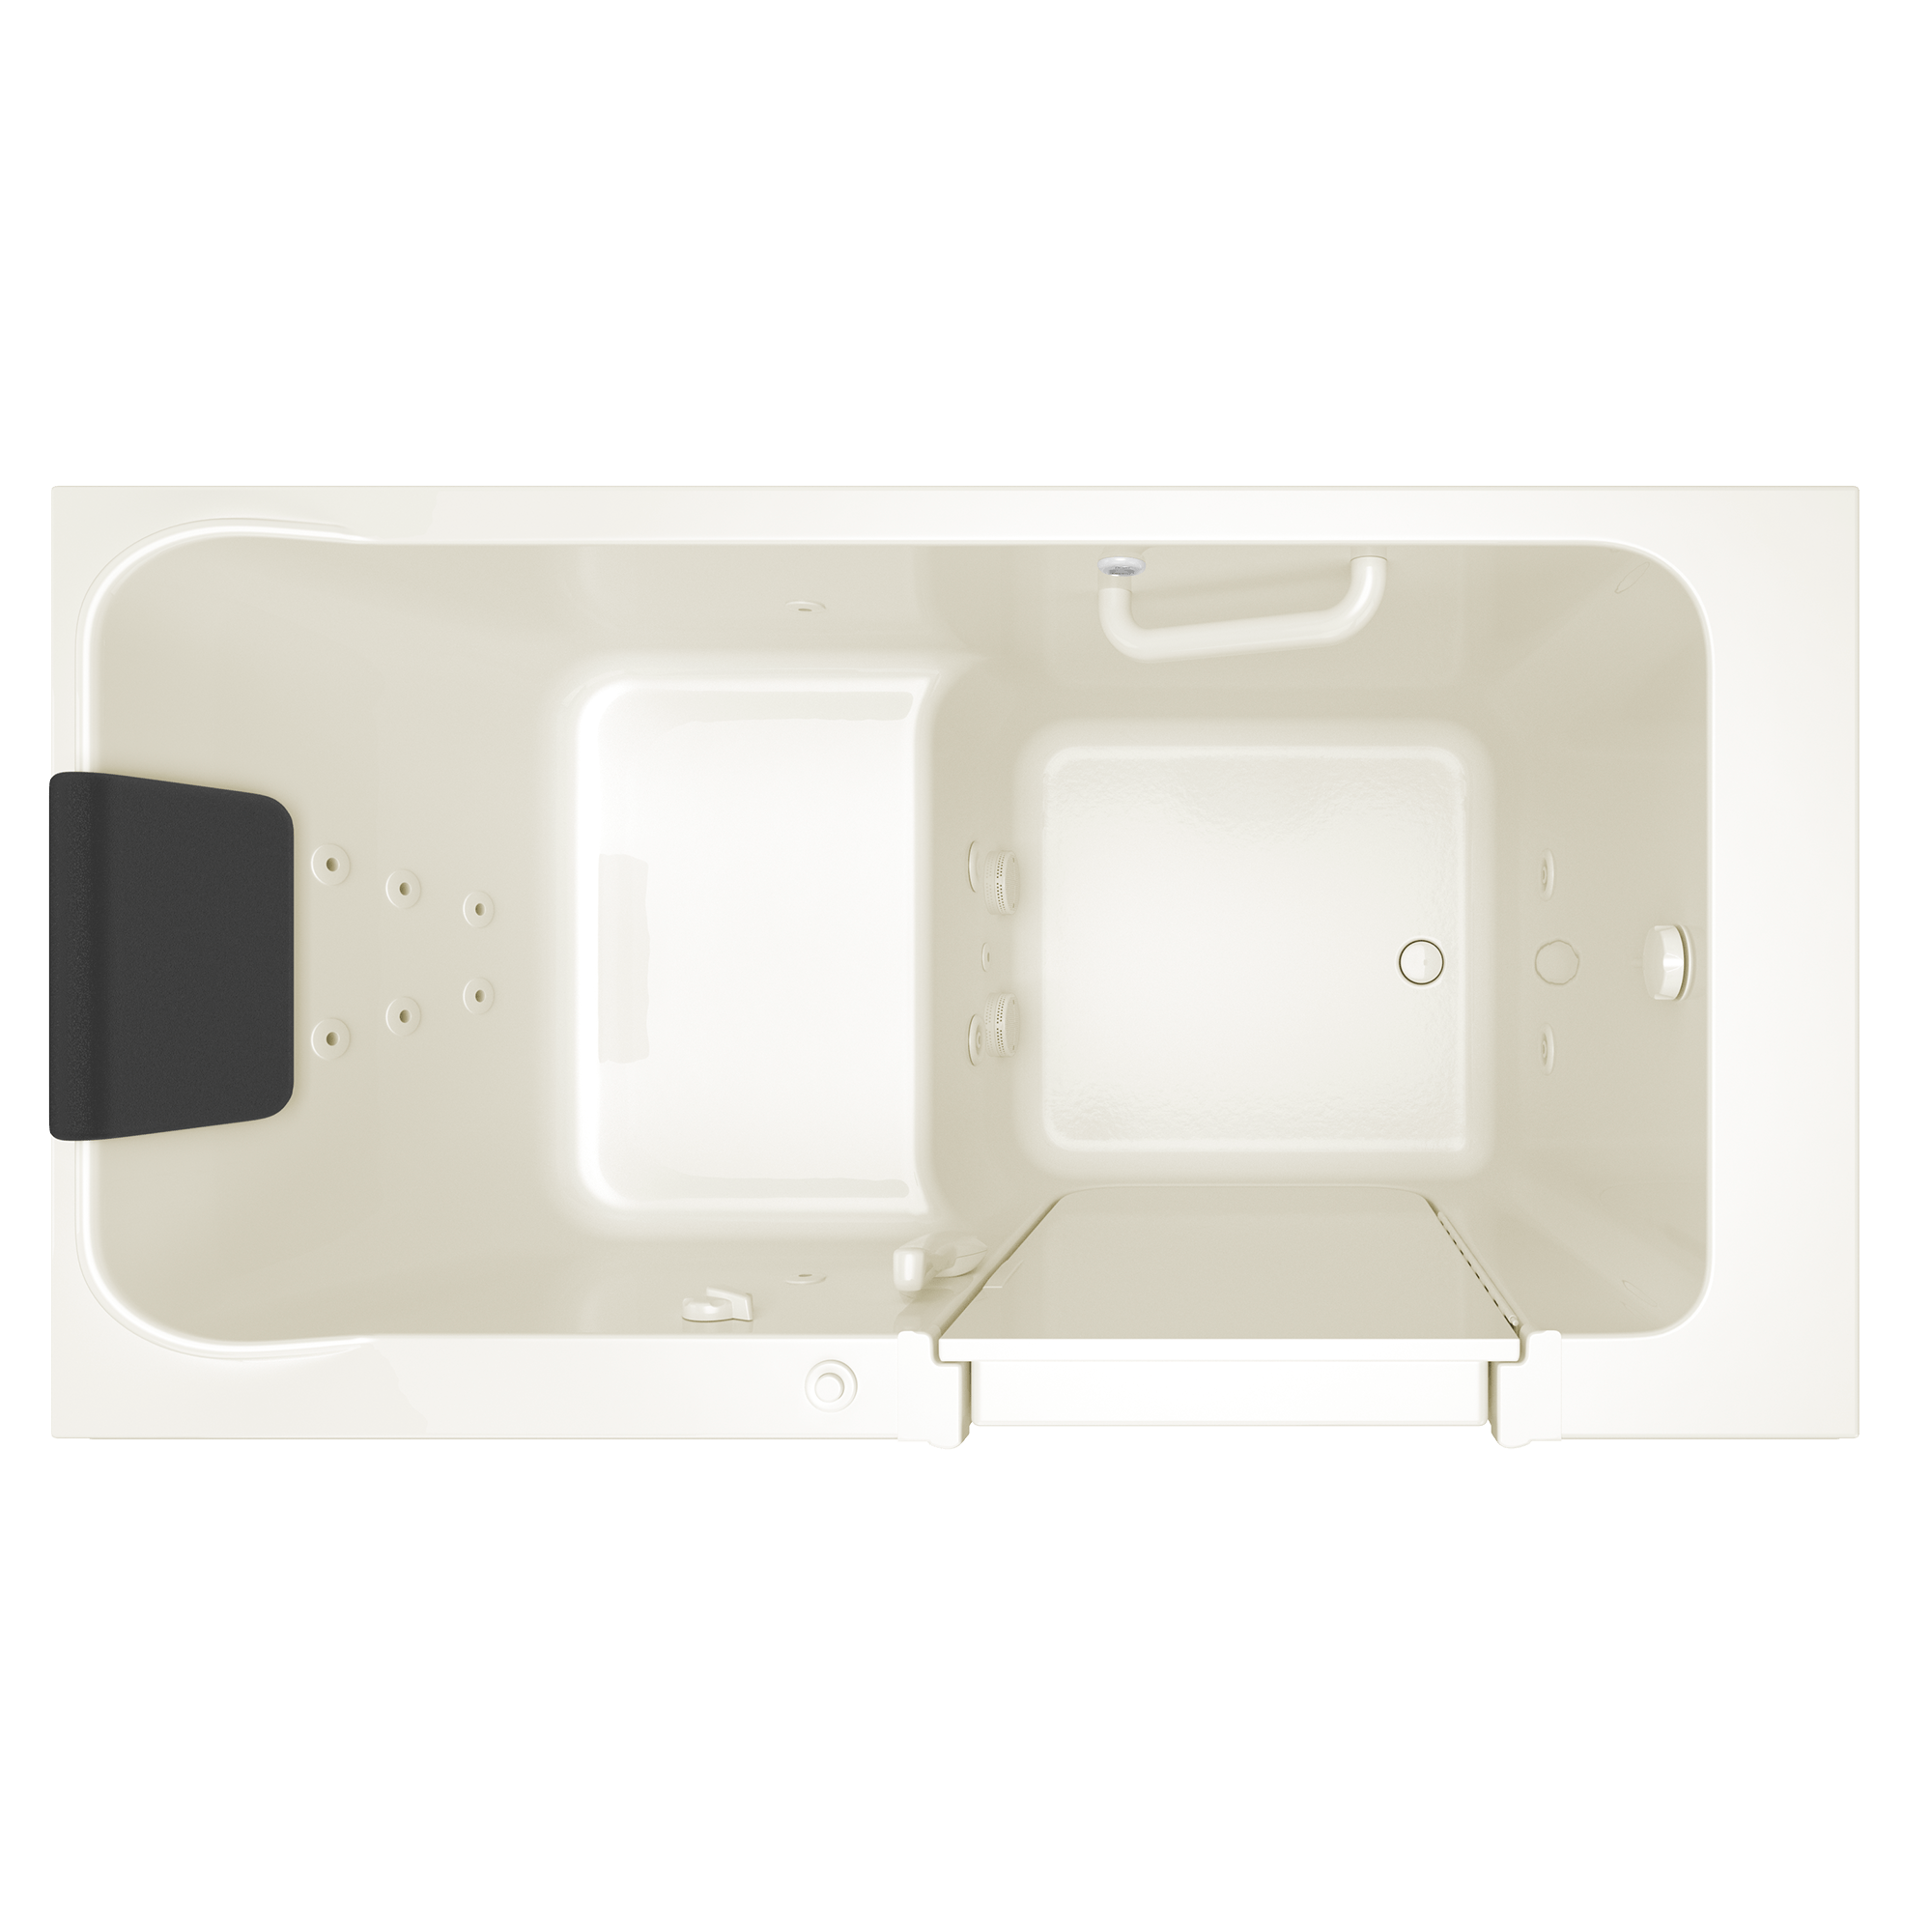 Acrylic Luxury Series 32 x 60 -Inch Walk-in Tub With Whirlpool System - Right-Hand Drain